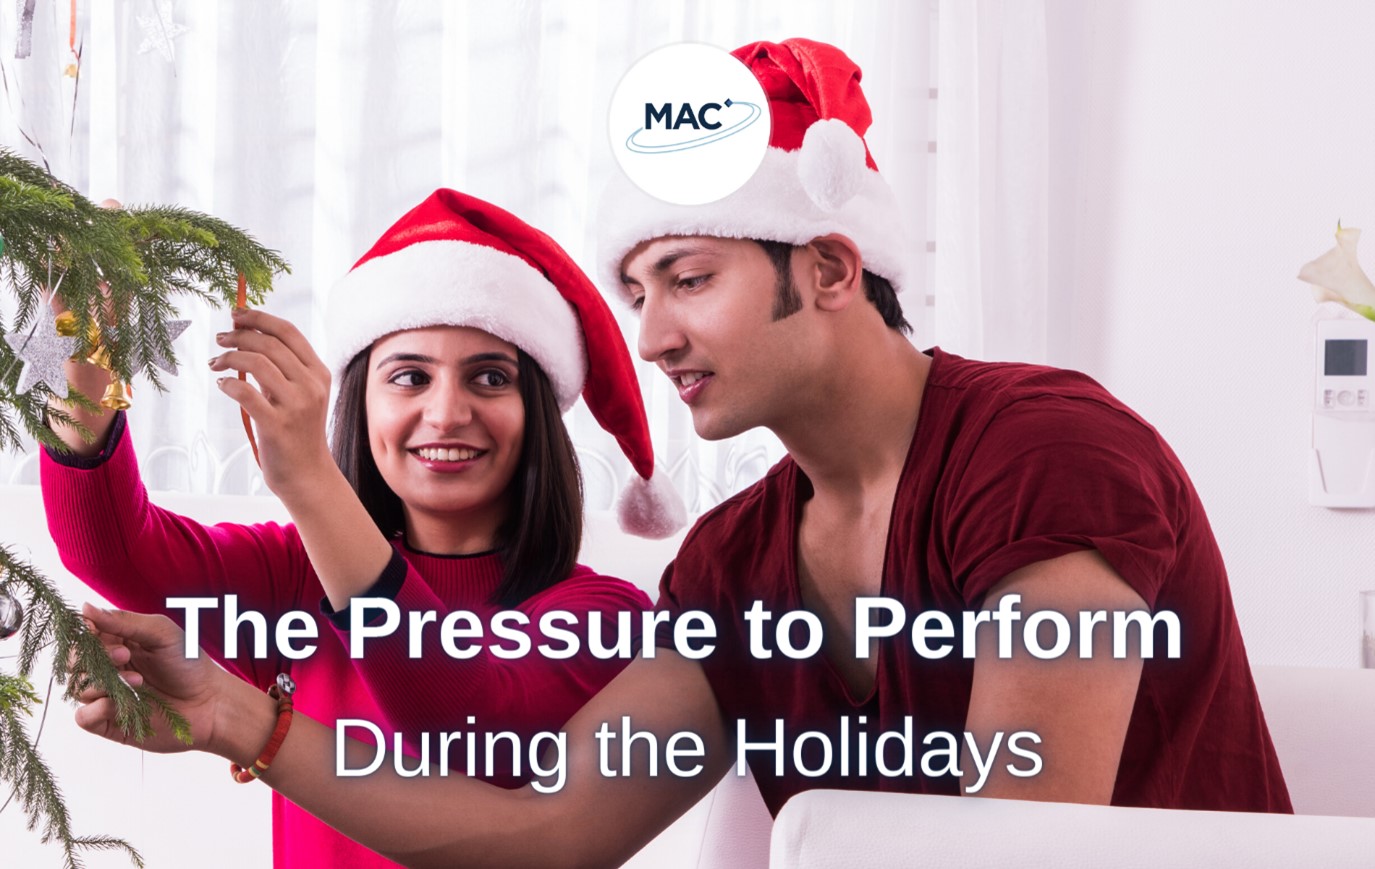 The pressure to perform during the holidays